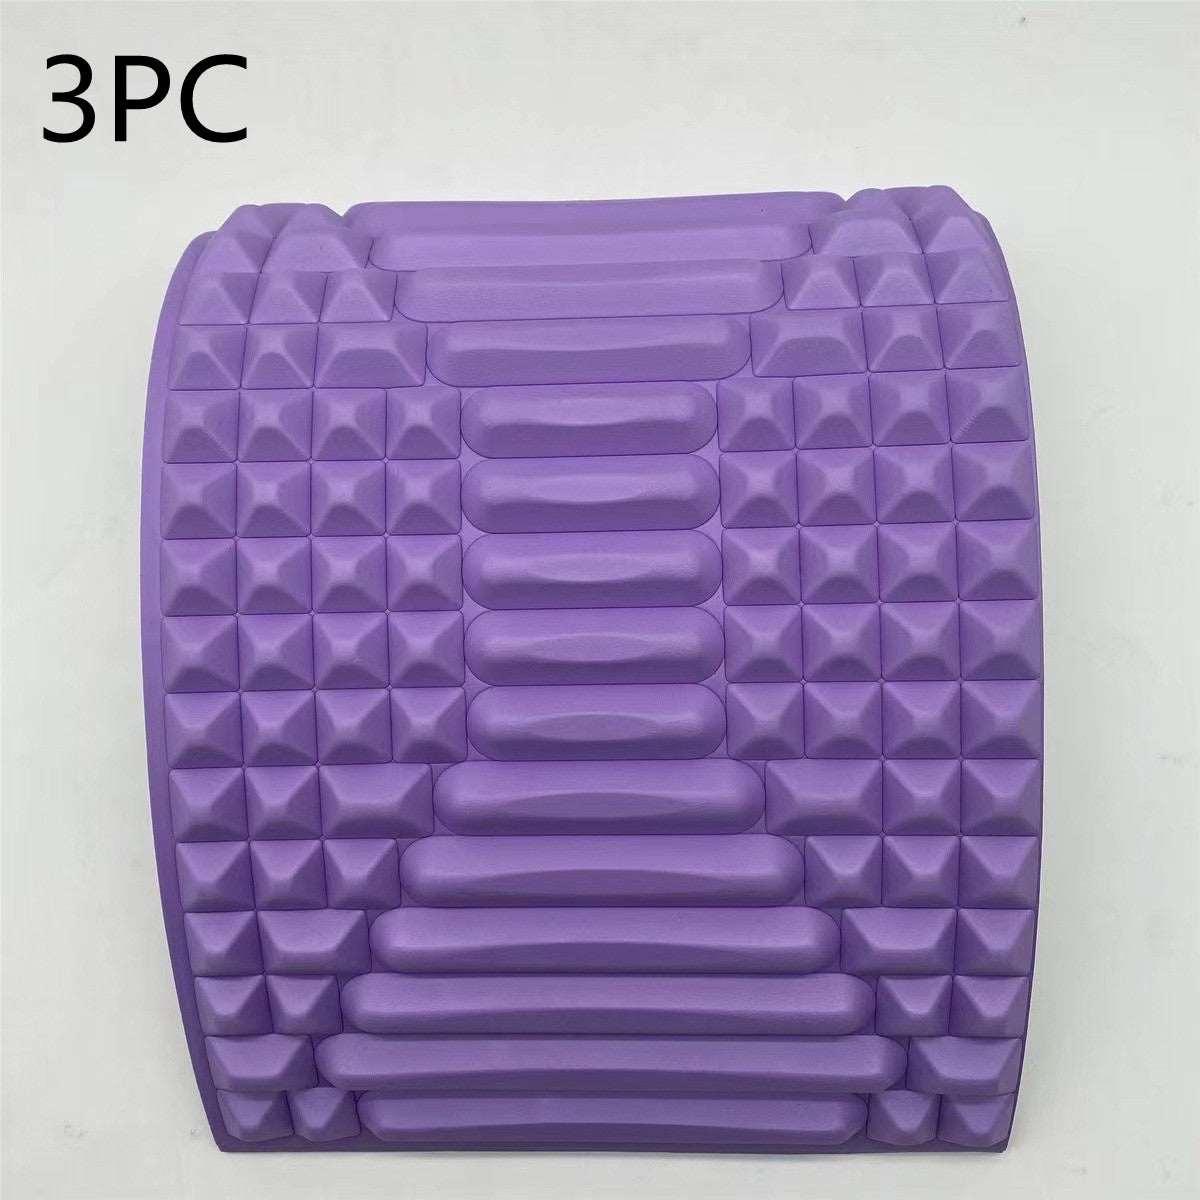 Back Stretcher Pillow Neck Lumbar Support Massager For Neck Waist Back Sciatica Herniated Disc Pain Relief Massage Relaxation - Whimsicaloasis